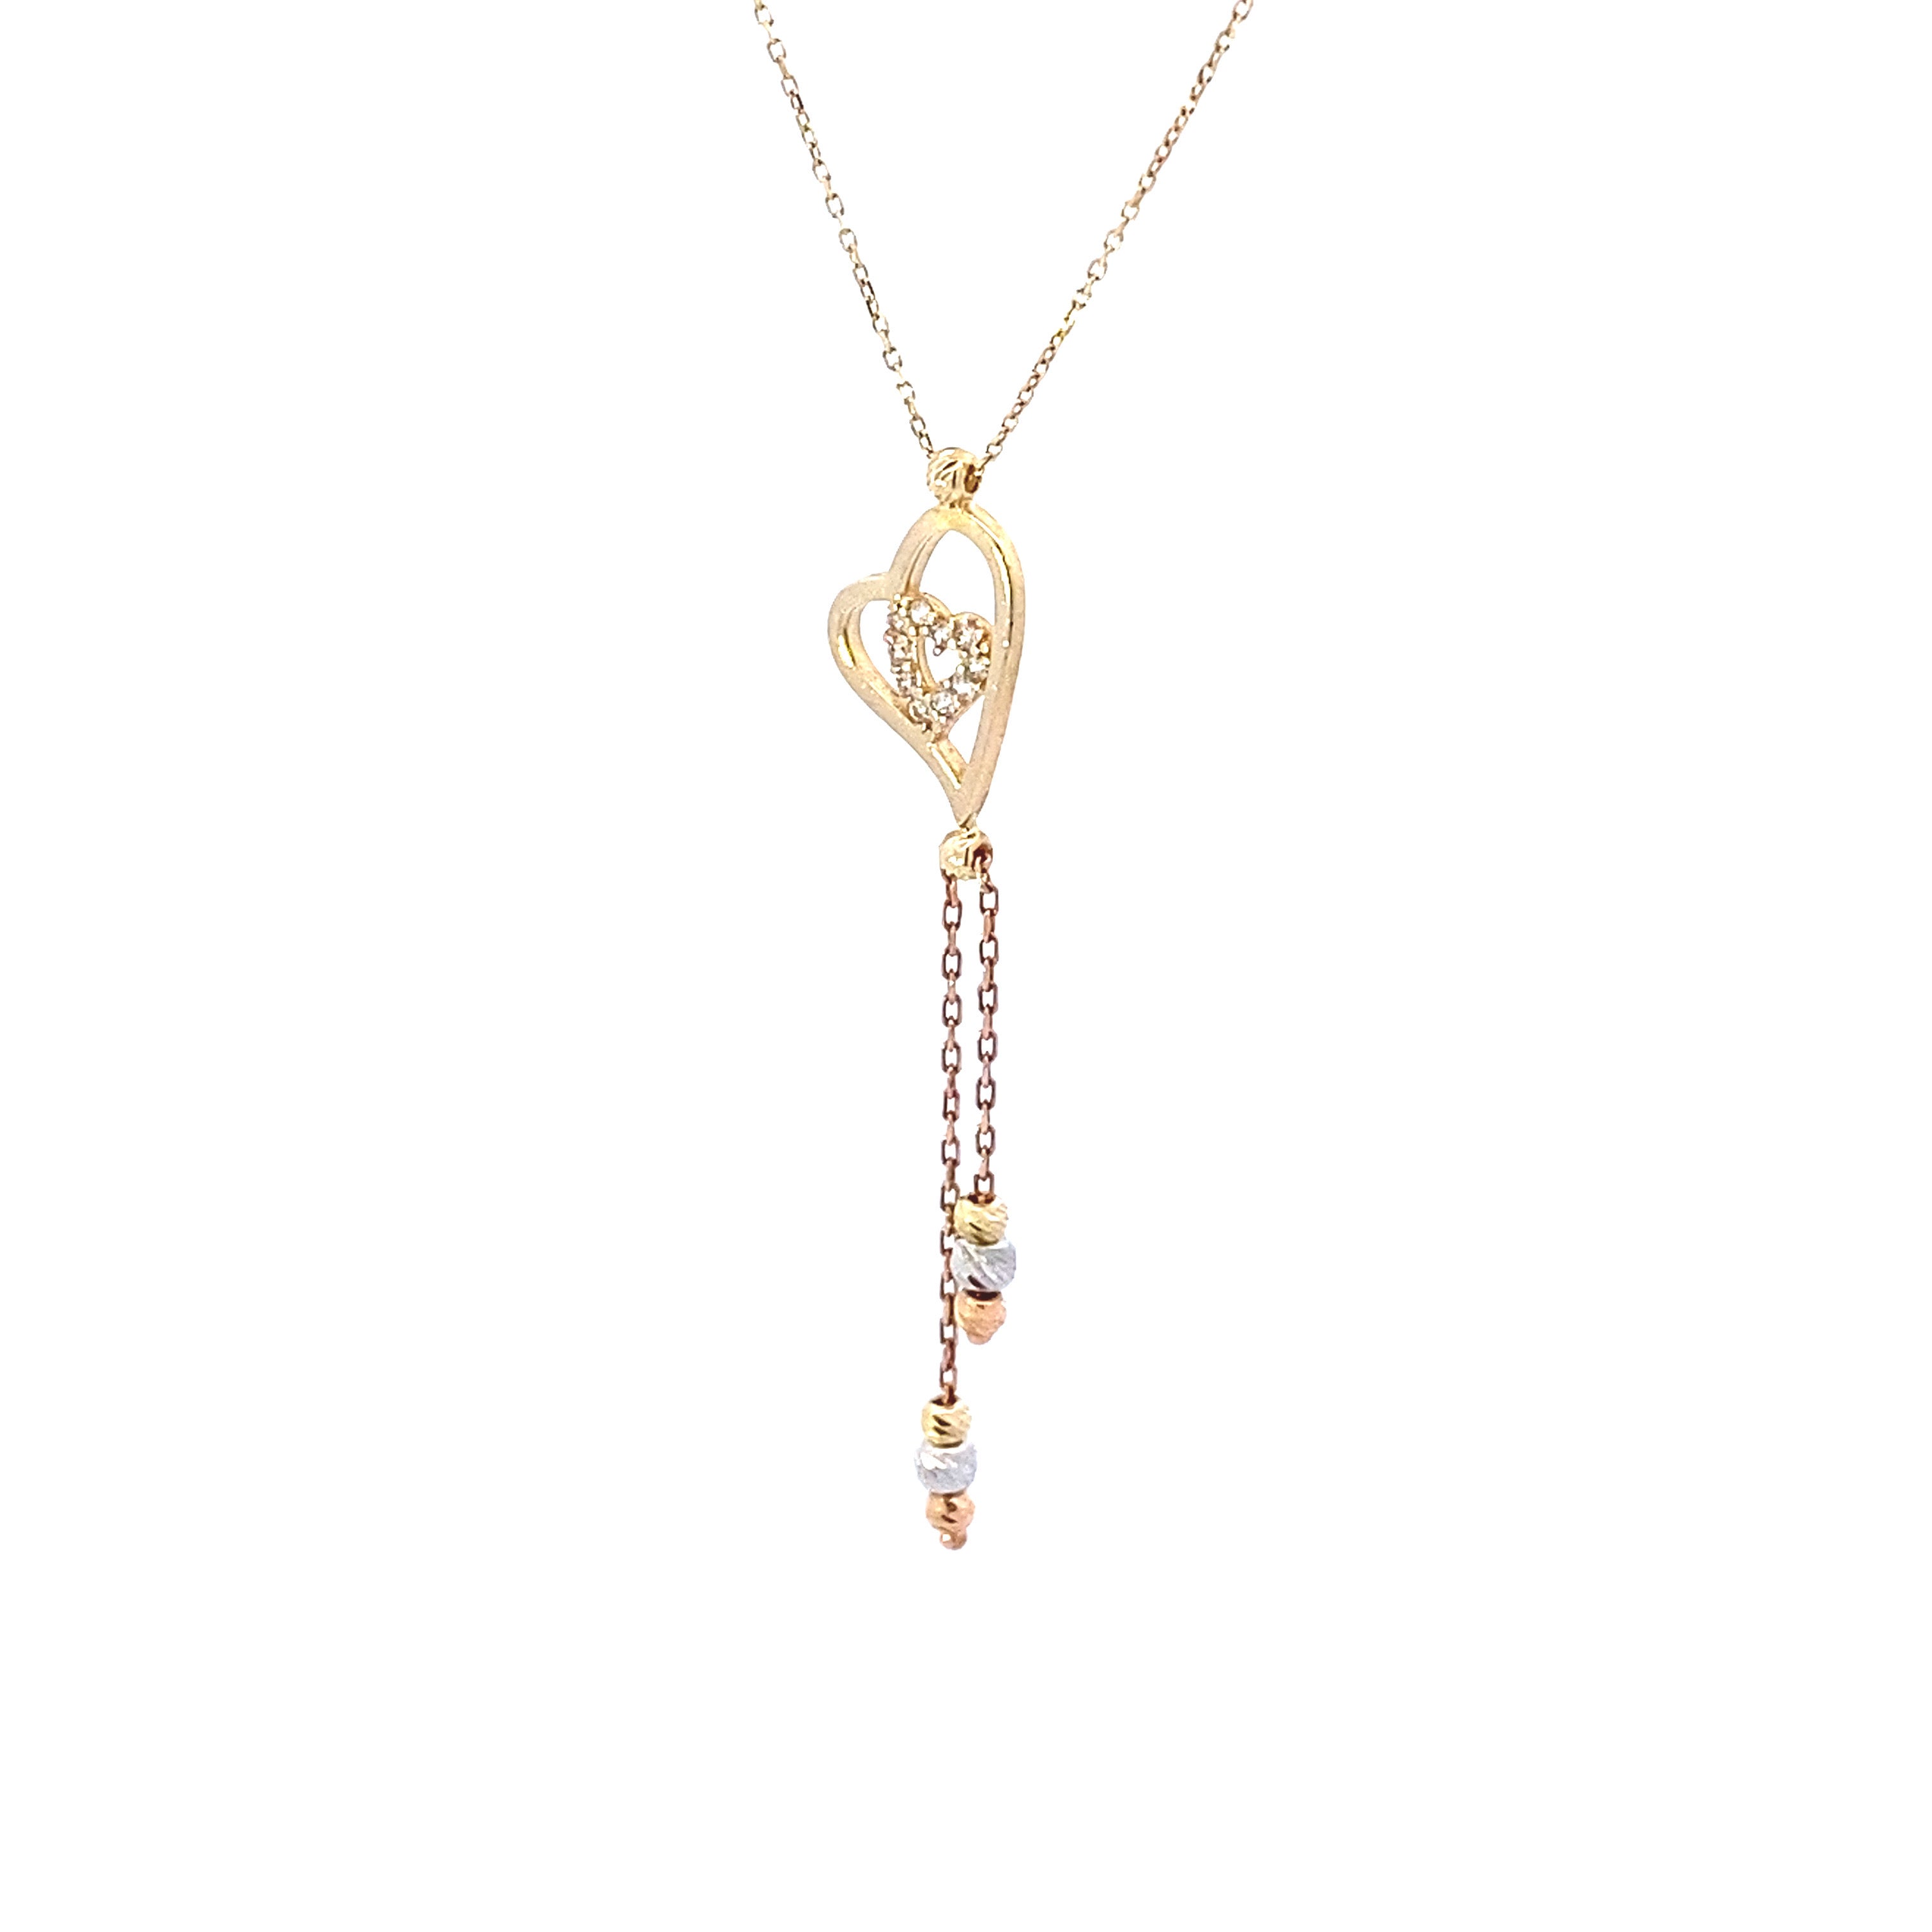 Hanging Heart Necklace 14K Gold